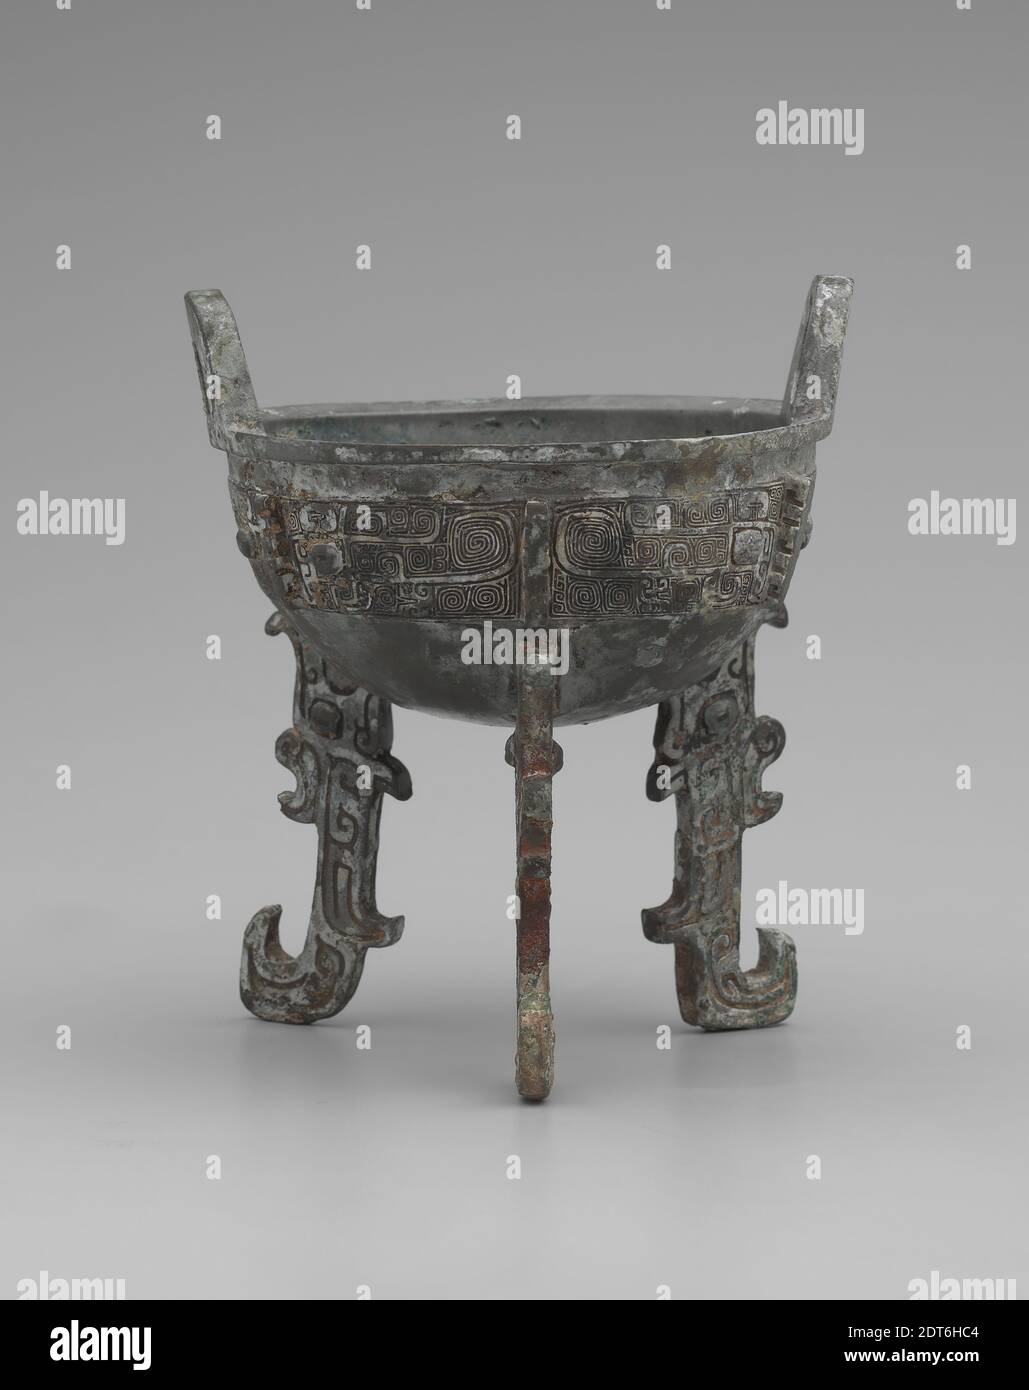 Ritual Food Vessel (Ding), Bronze, 6 1/2 × 5 3/4 in. (16.5 × 14.6 cm), Early Chinese bronze vessels were cast using a distinctive piece-mold technology, in which several ceramic pieces were carved individually and assembled around a clay core. The space between the inner core and the molds was then filled with molten bronze, and after the bronze dried, the ceramic core and molds were removed. The dense decoration and interlocking designs on this example were carved into the clay molds in reverse, so that they would read properly on the completed vessel., China, Chinese, Shang dynasty Stock Photo